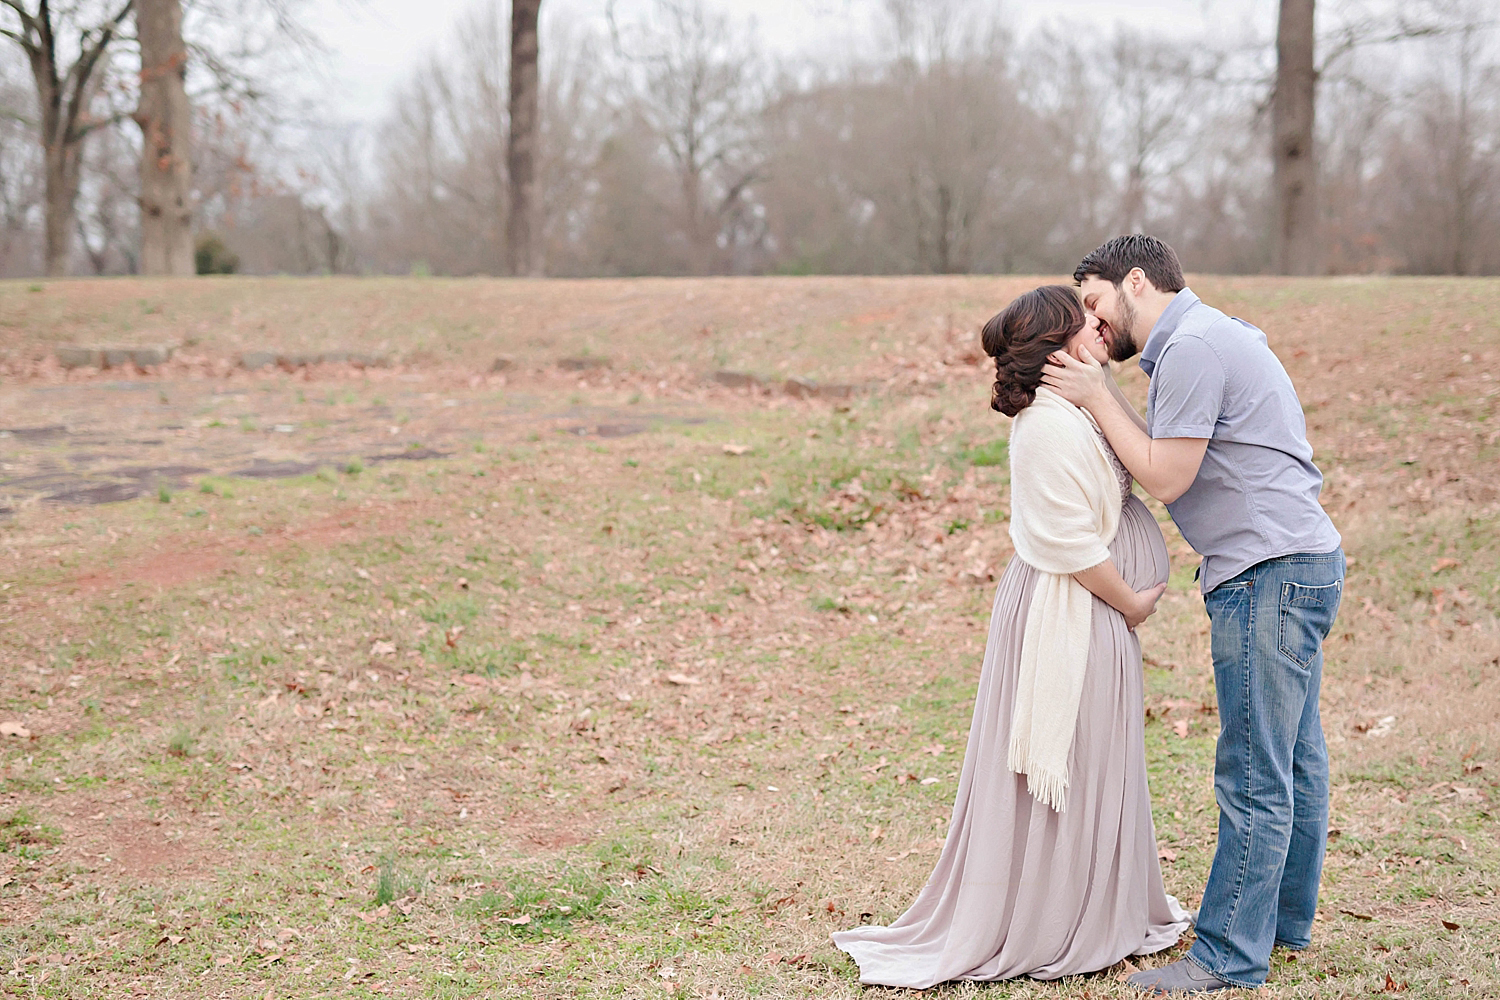  The expectant couple are standing in an Atlanta park.  The husband holds his wife’s head in her hand as he kisses her. 